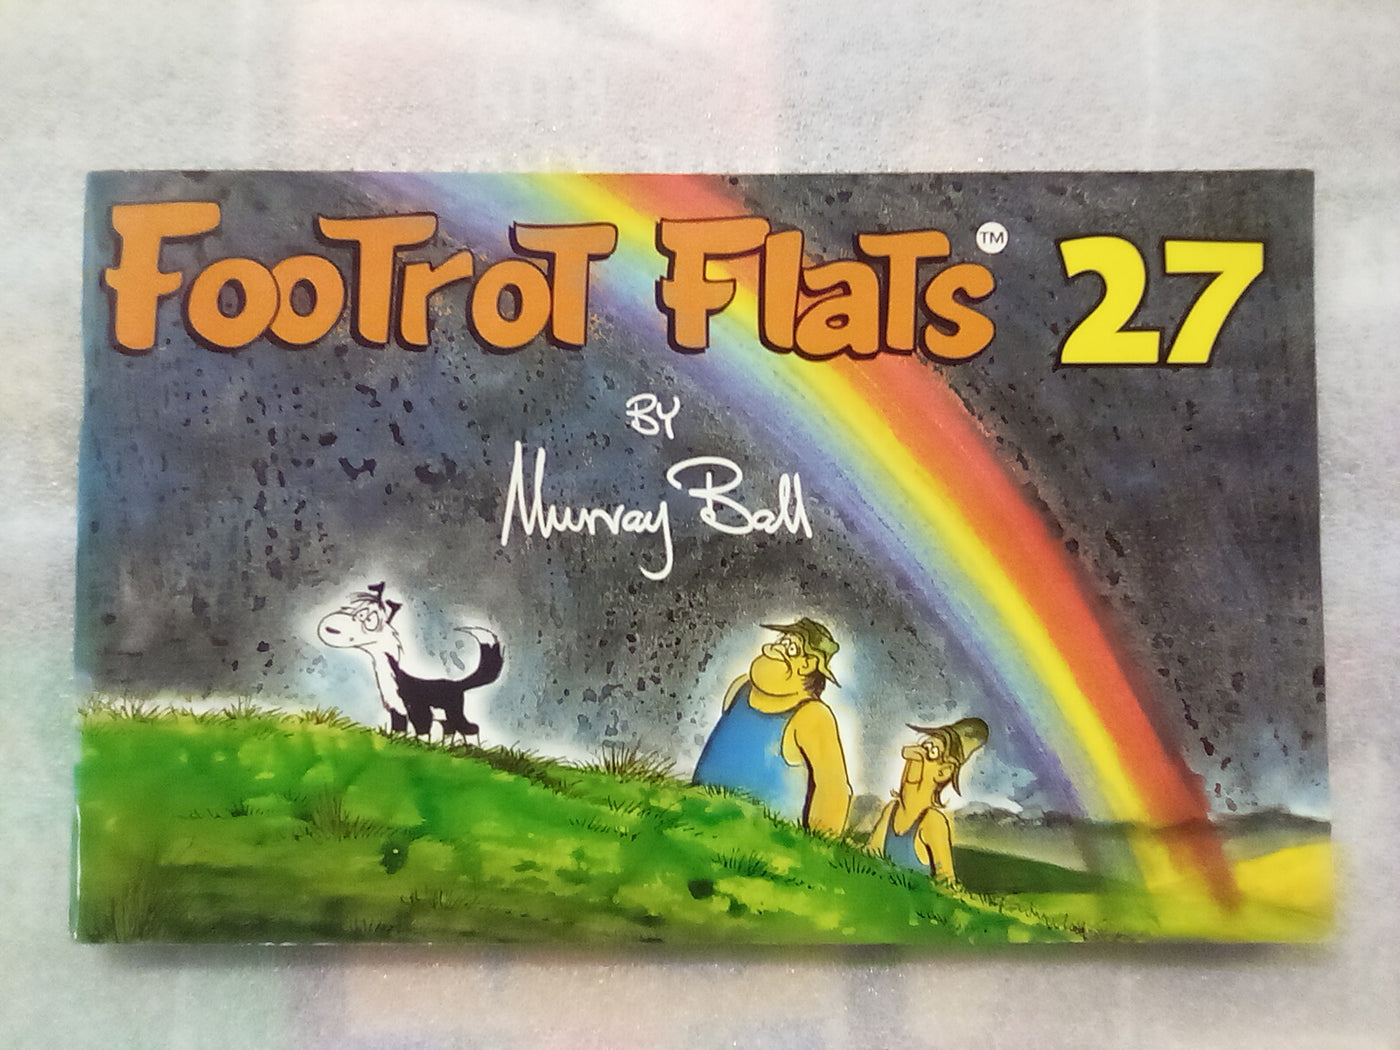 Footrot Flats 27 by Murray Ball